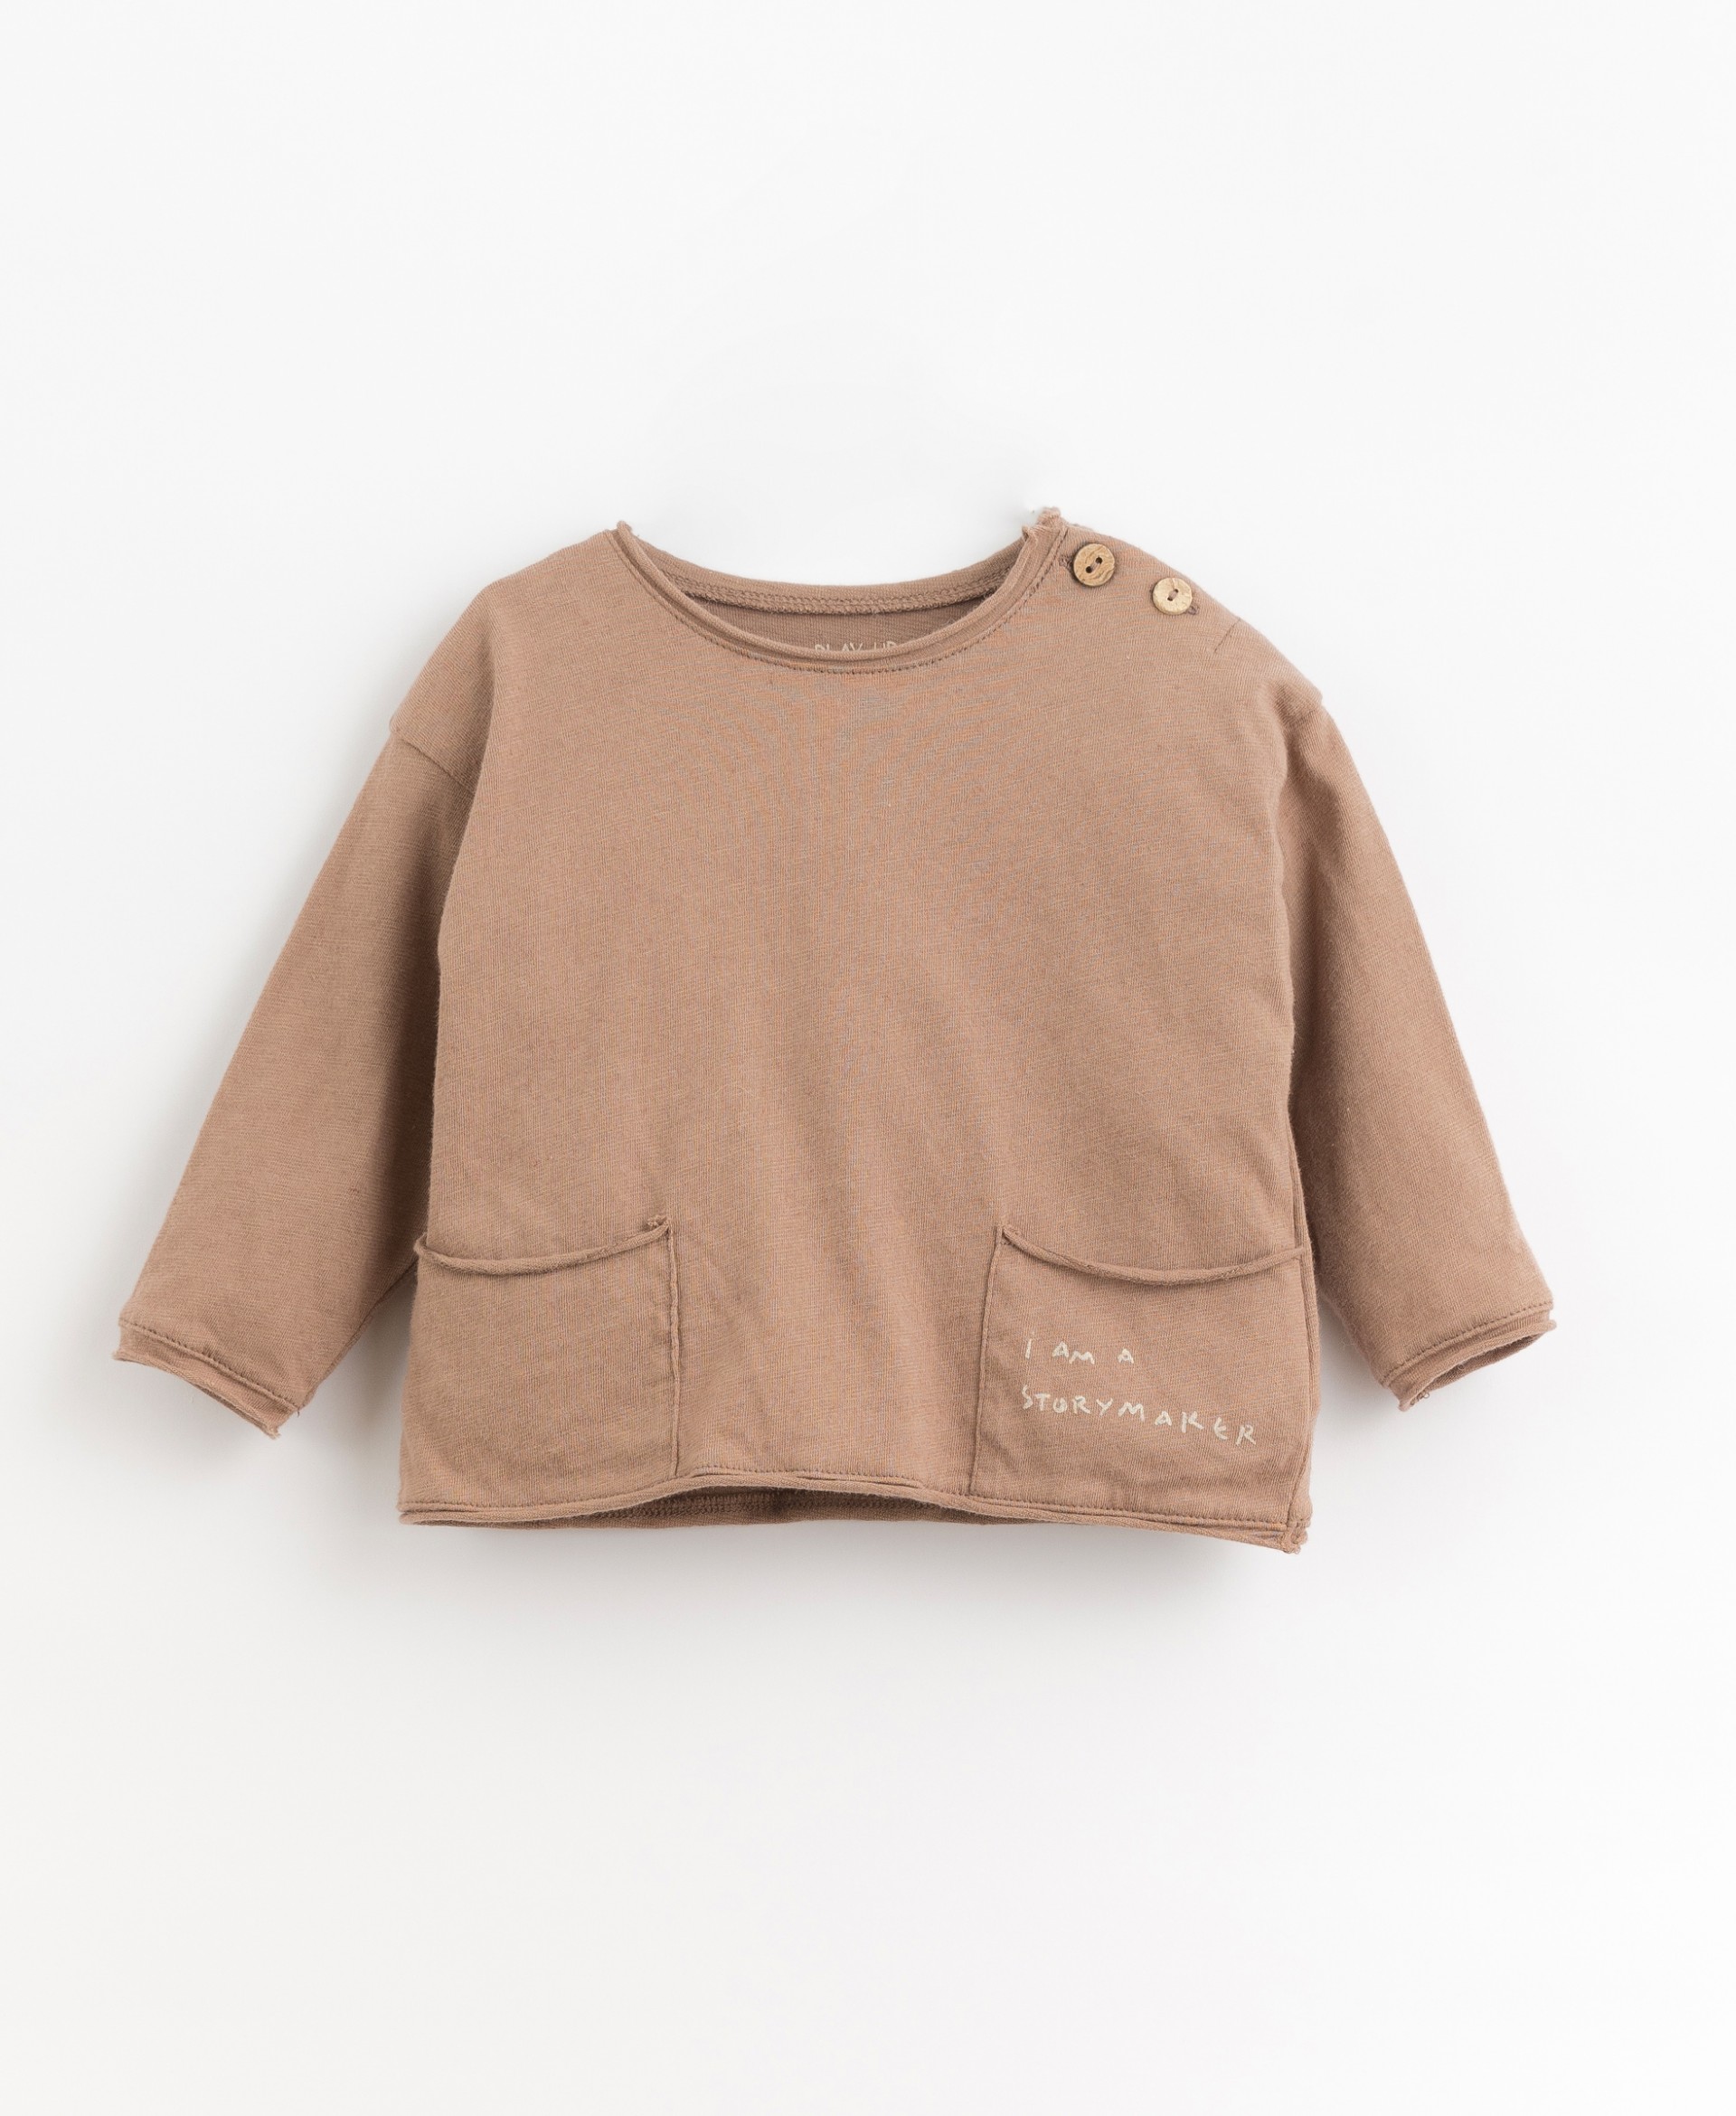 Long-sleeved T-shirt with writing on the pocket | Organic Care